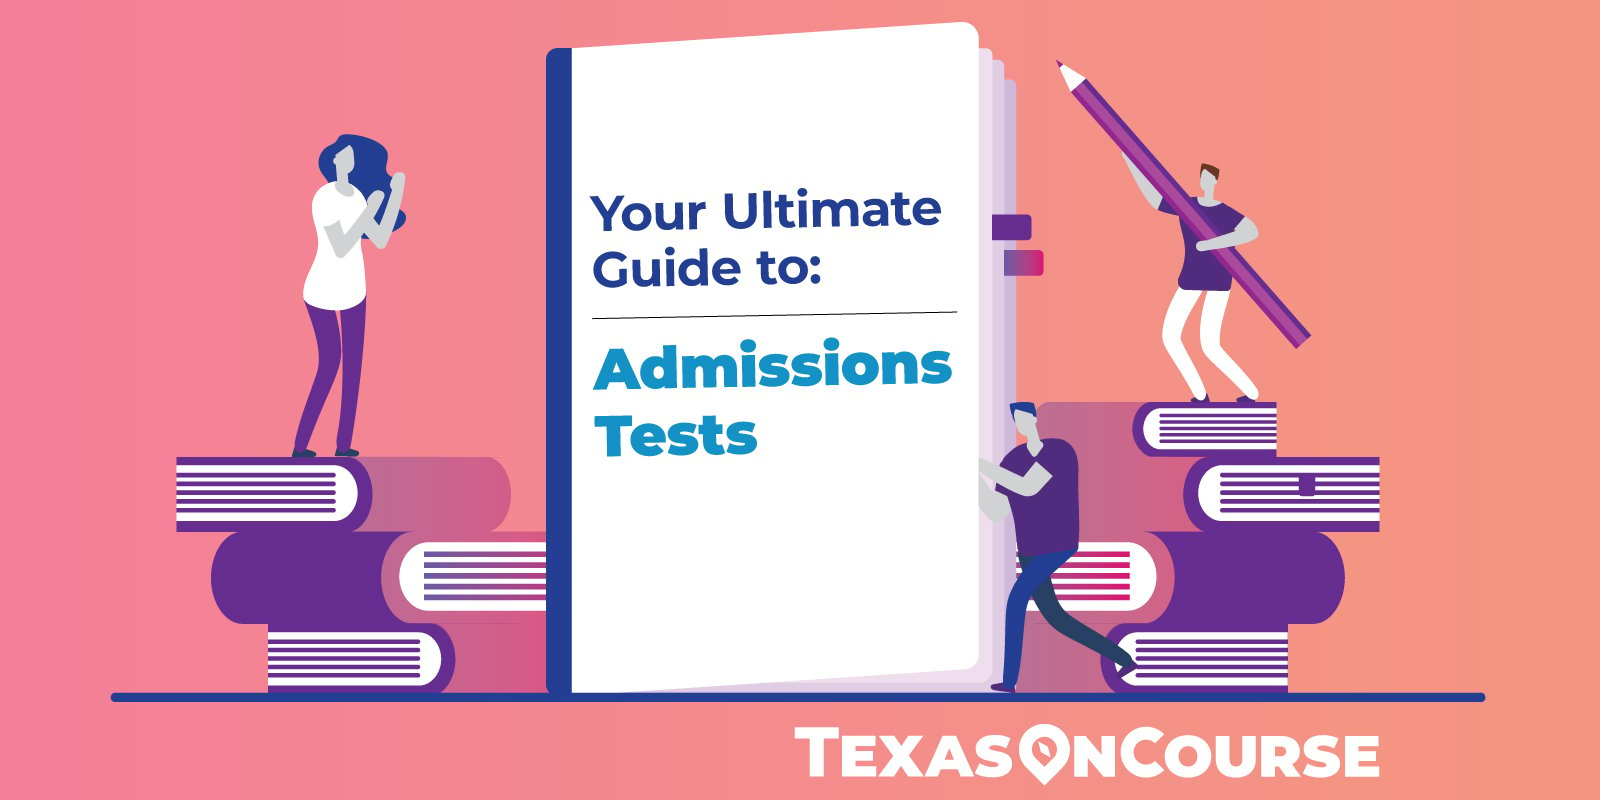 Your ultimate guide to admissions tests.